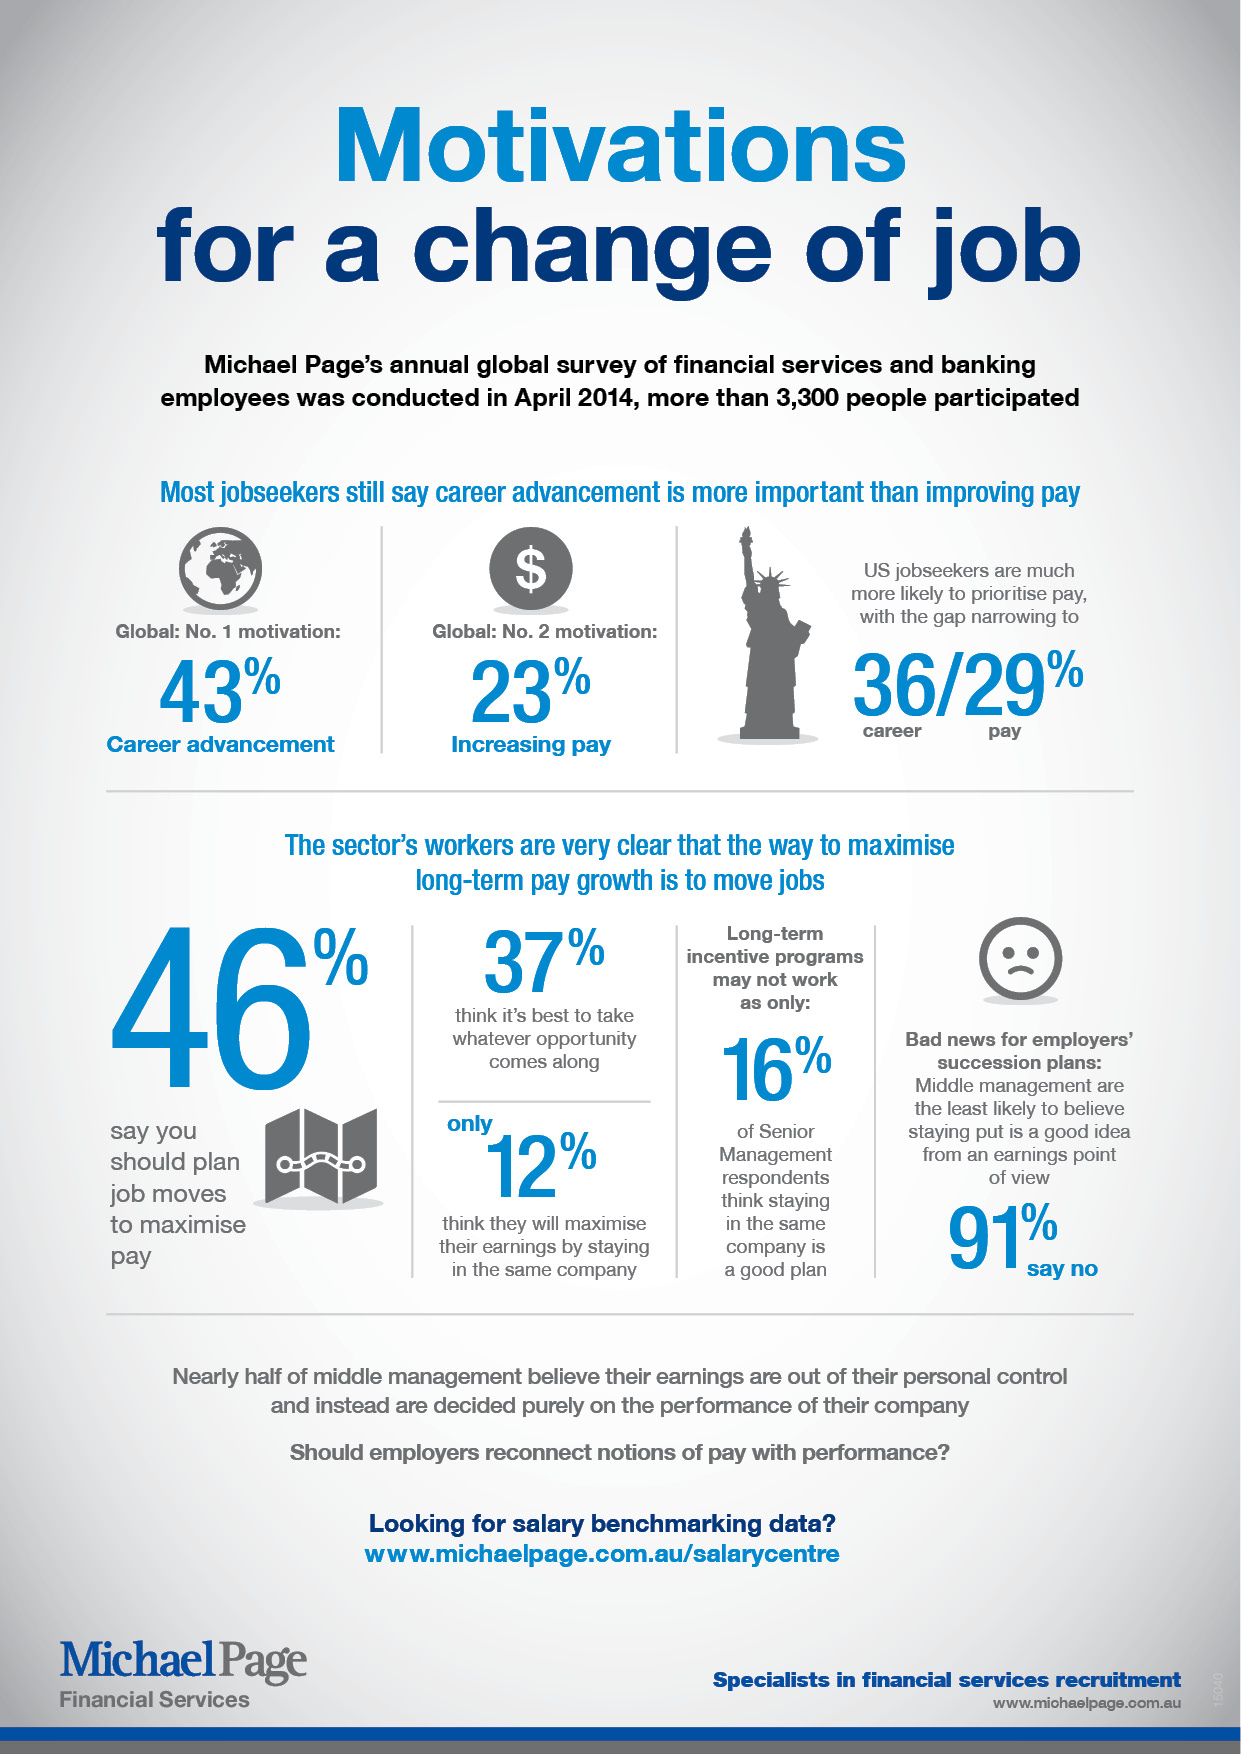 Motivations for a change of job